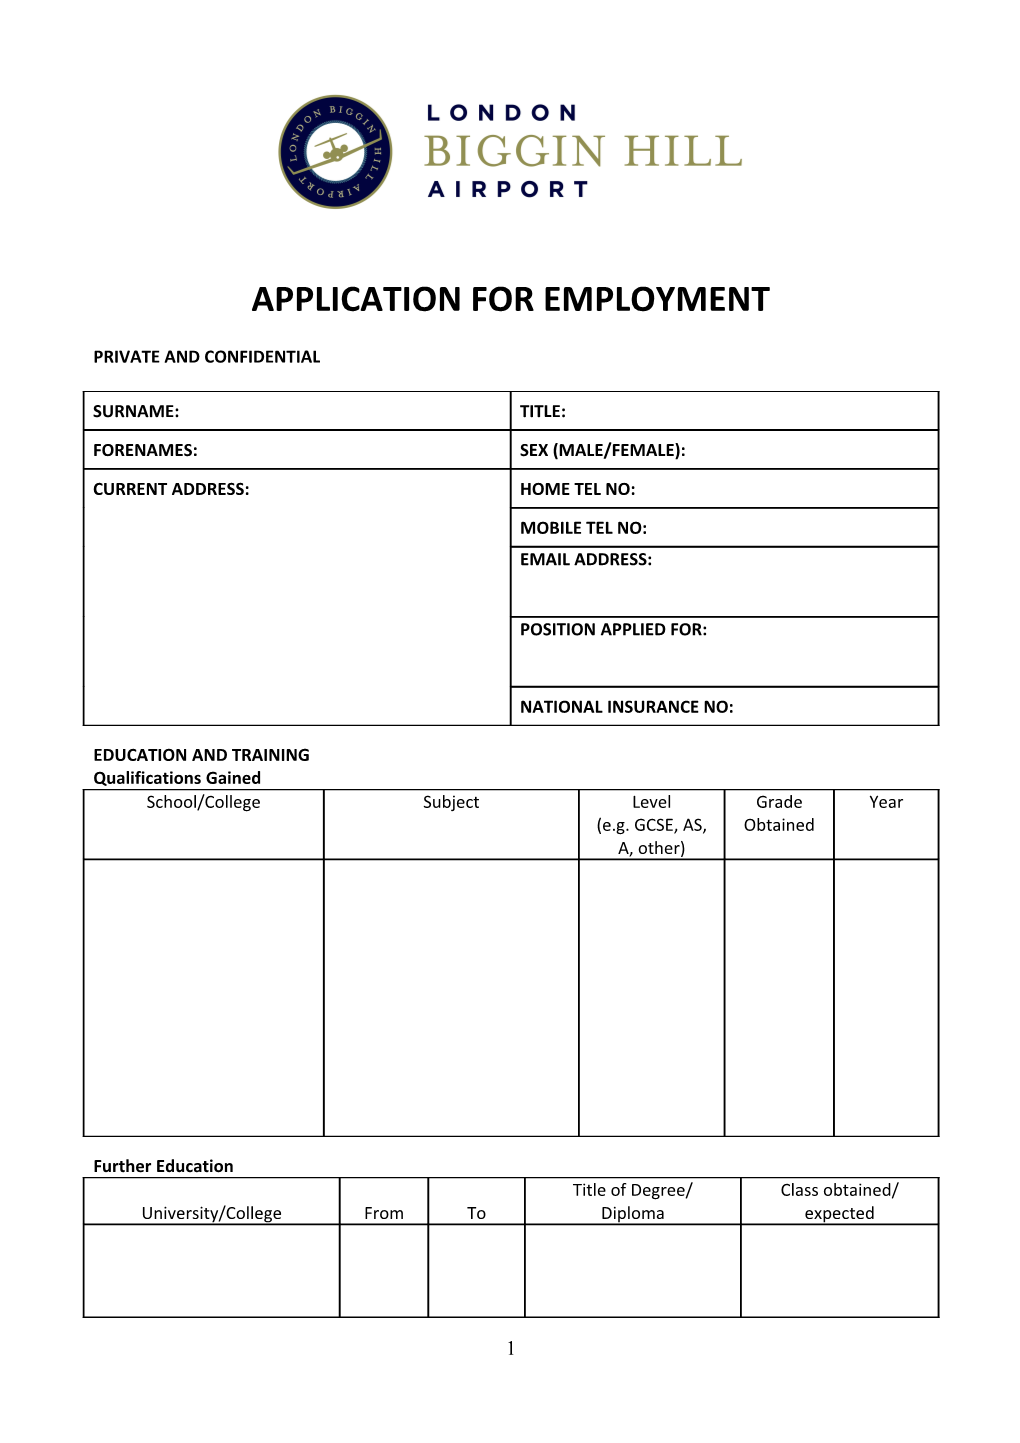 Application for Employment s180